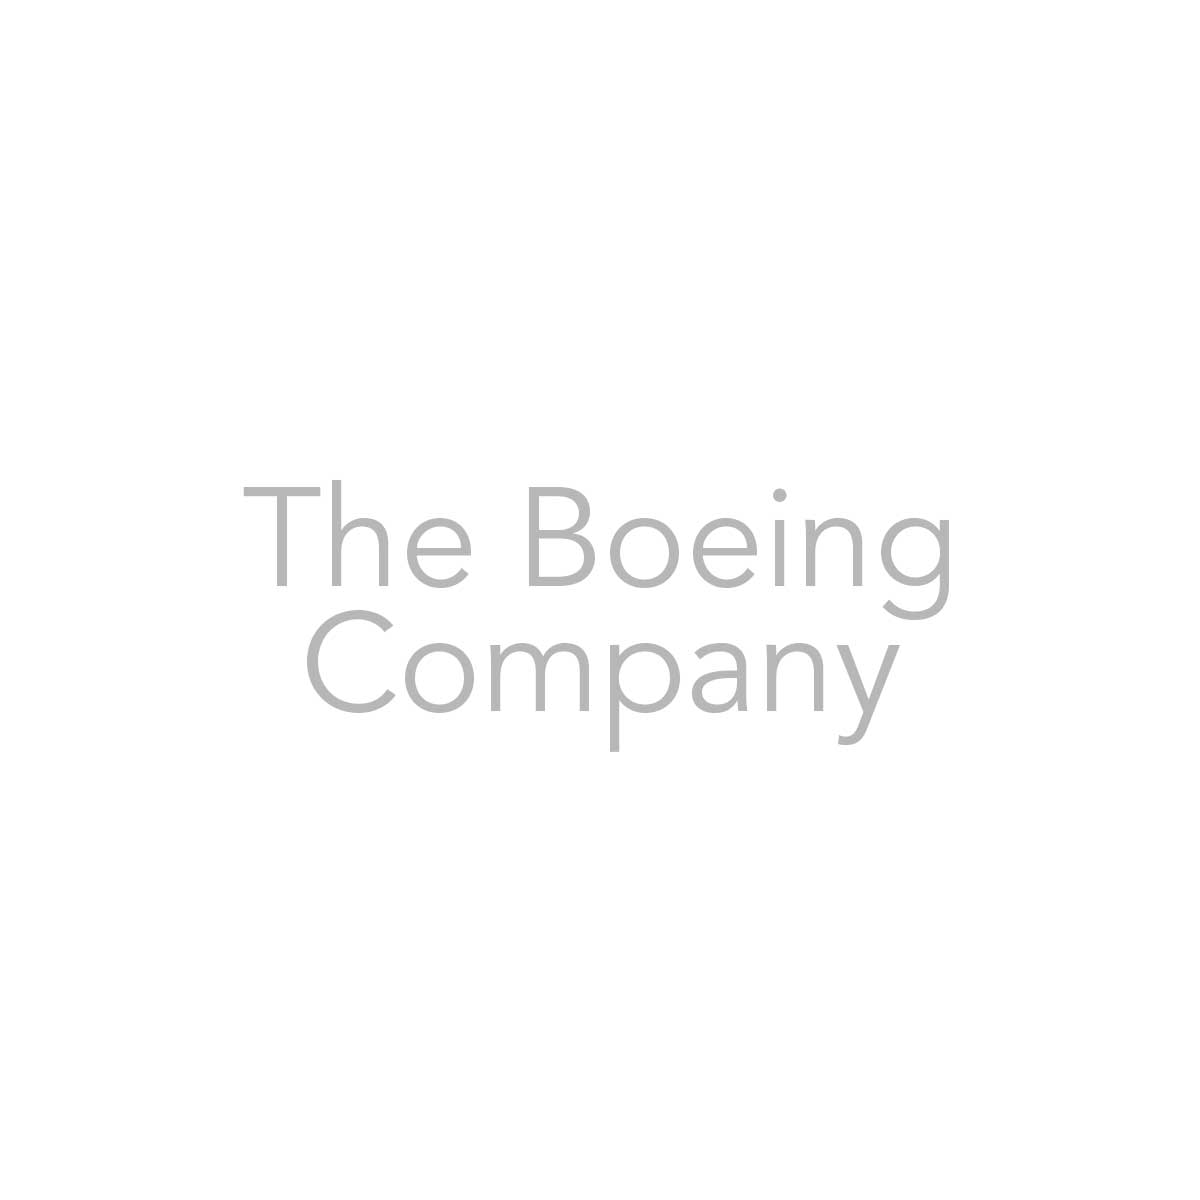 The Boeing company logo on Partners page